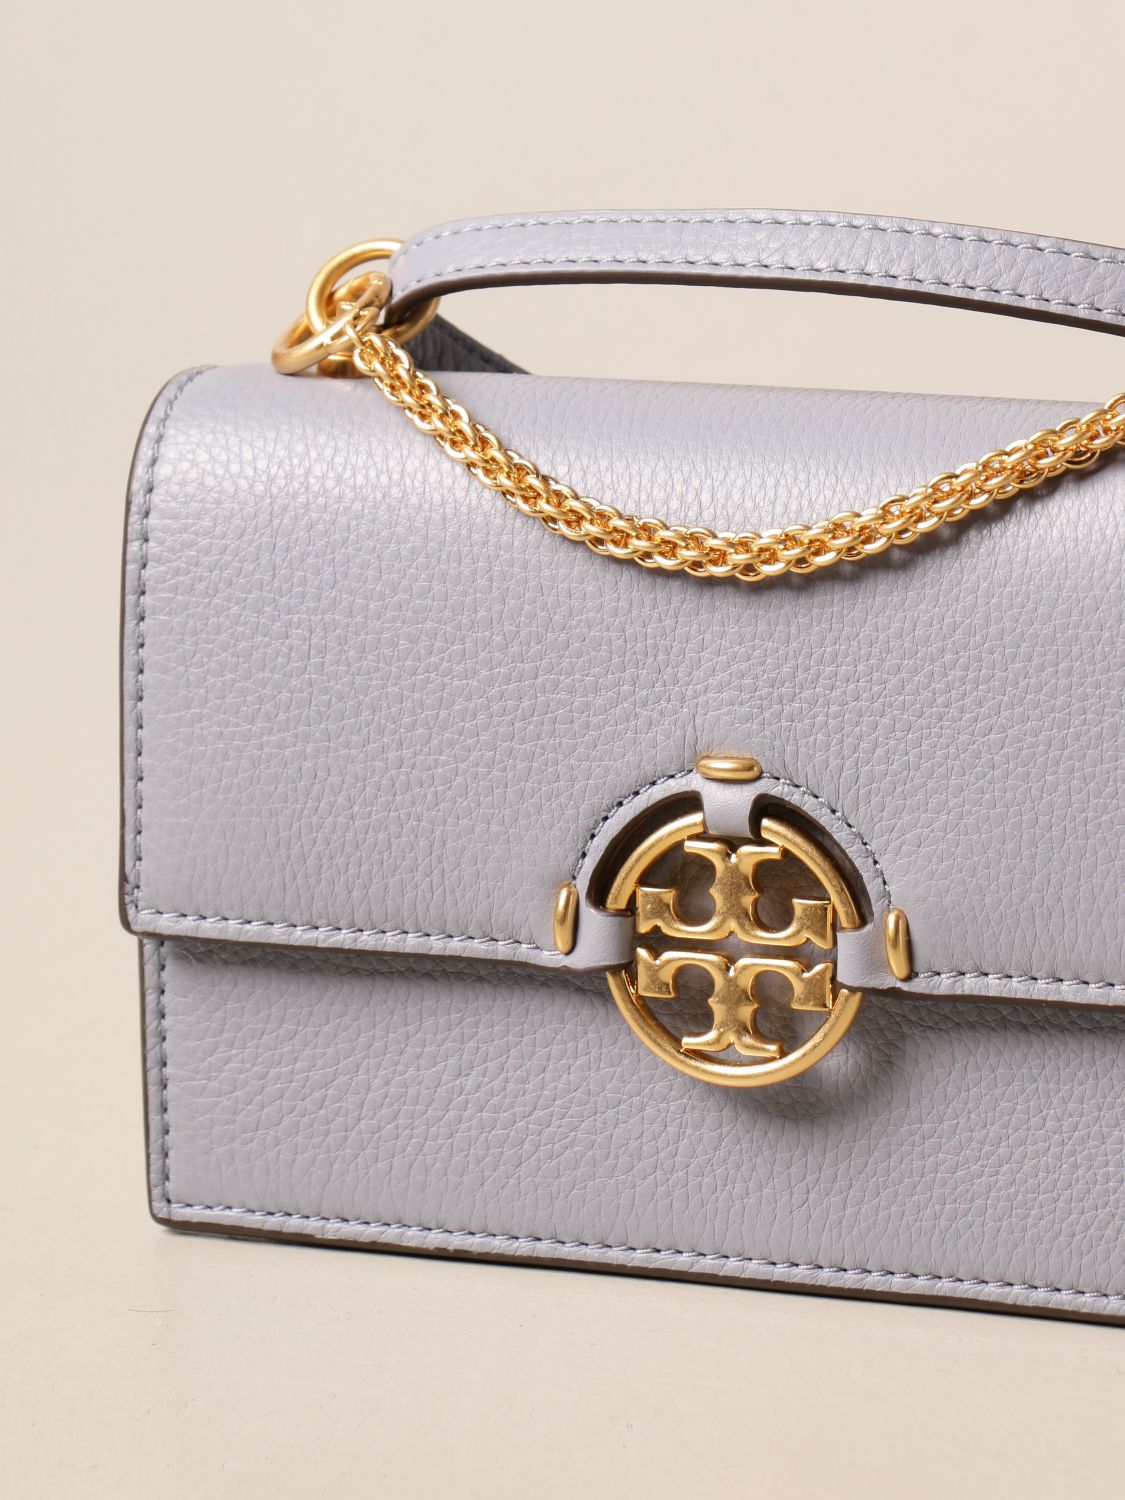 TORY BURCH: leather crossbody bags with crest - Black  Tory Burch  crossbody bags 80532 online at